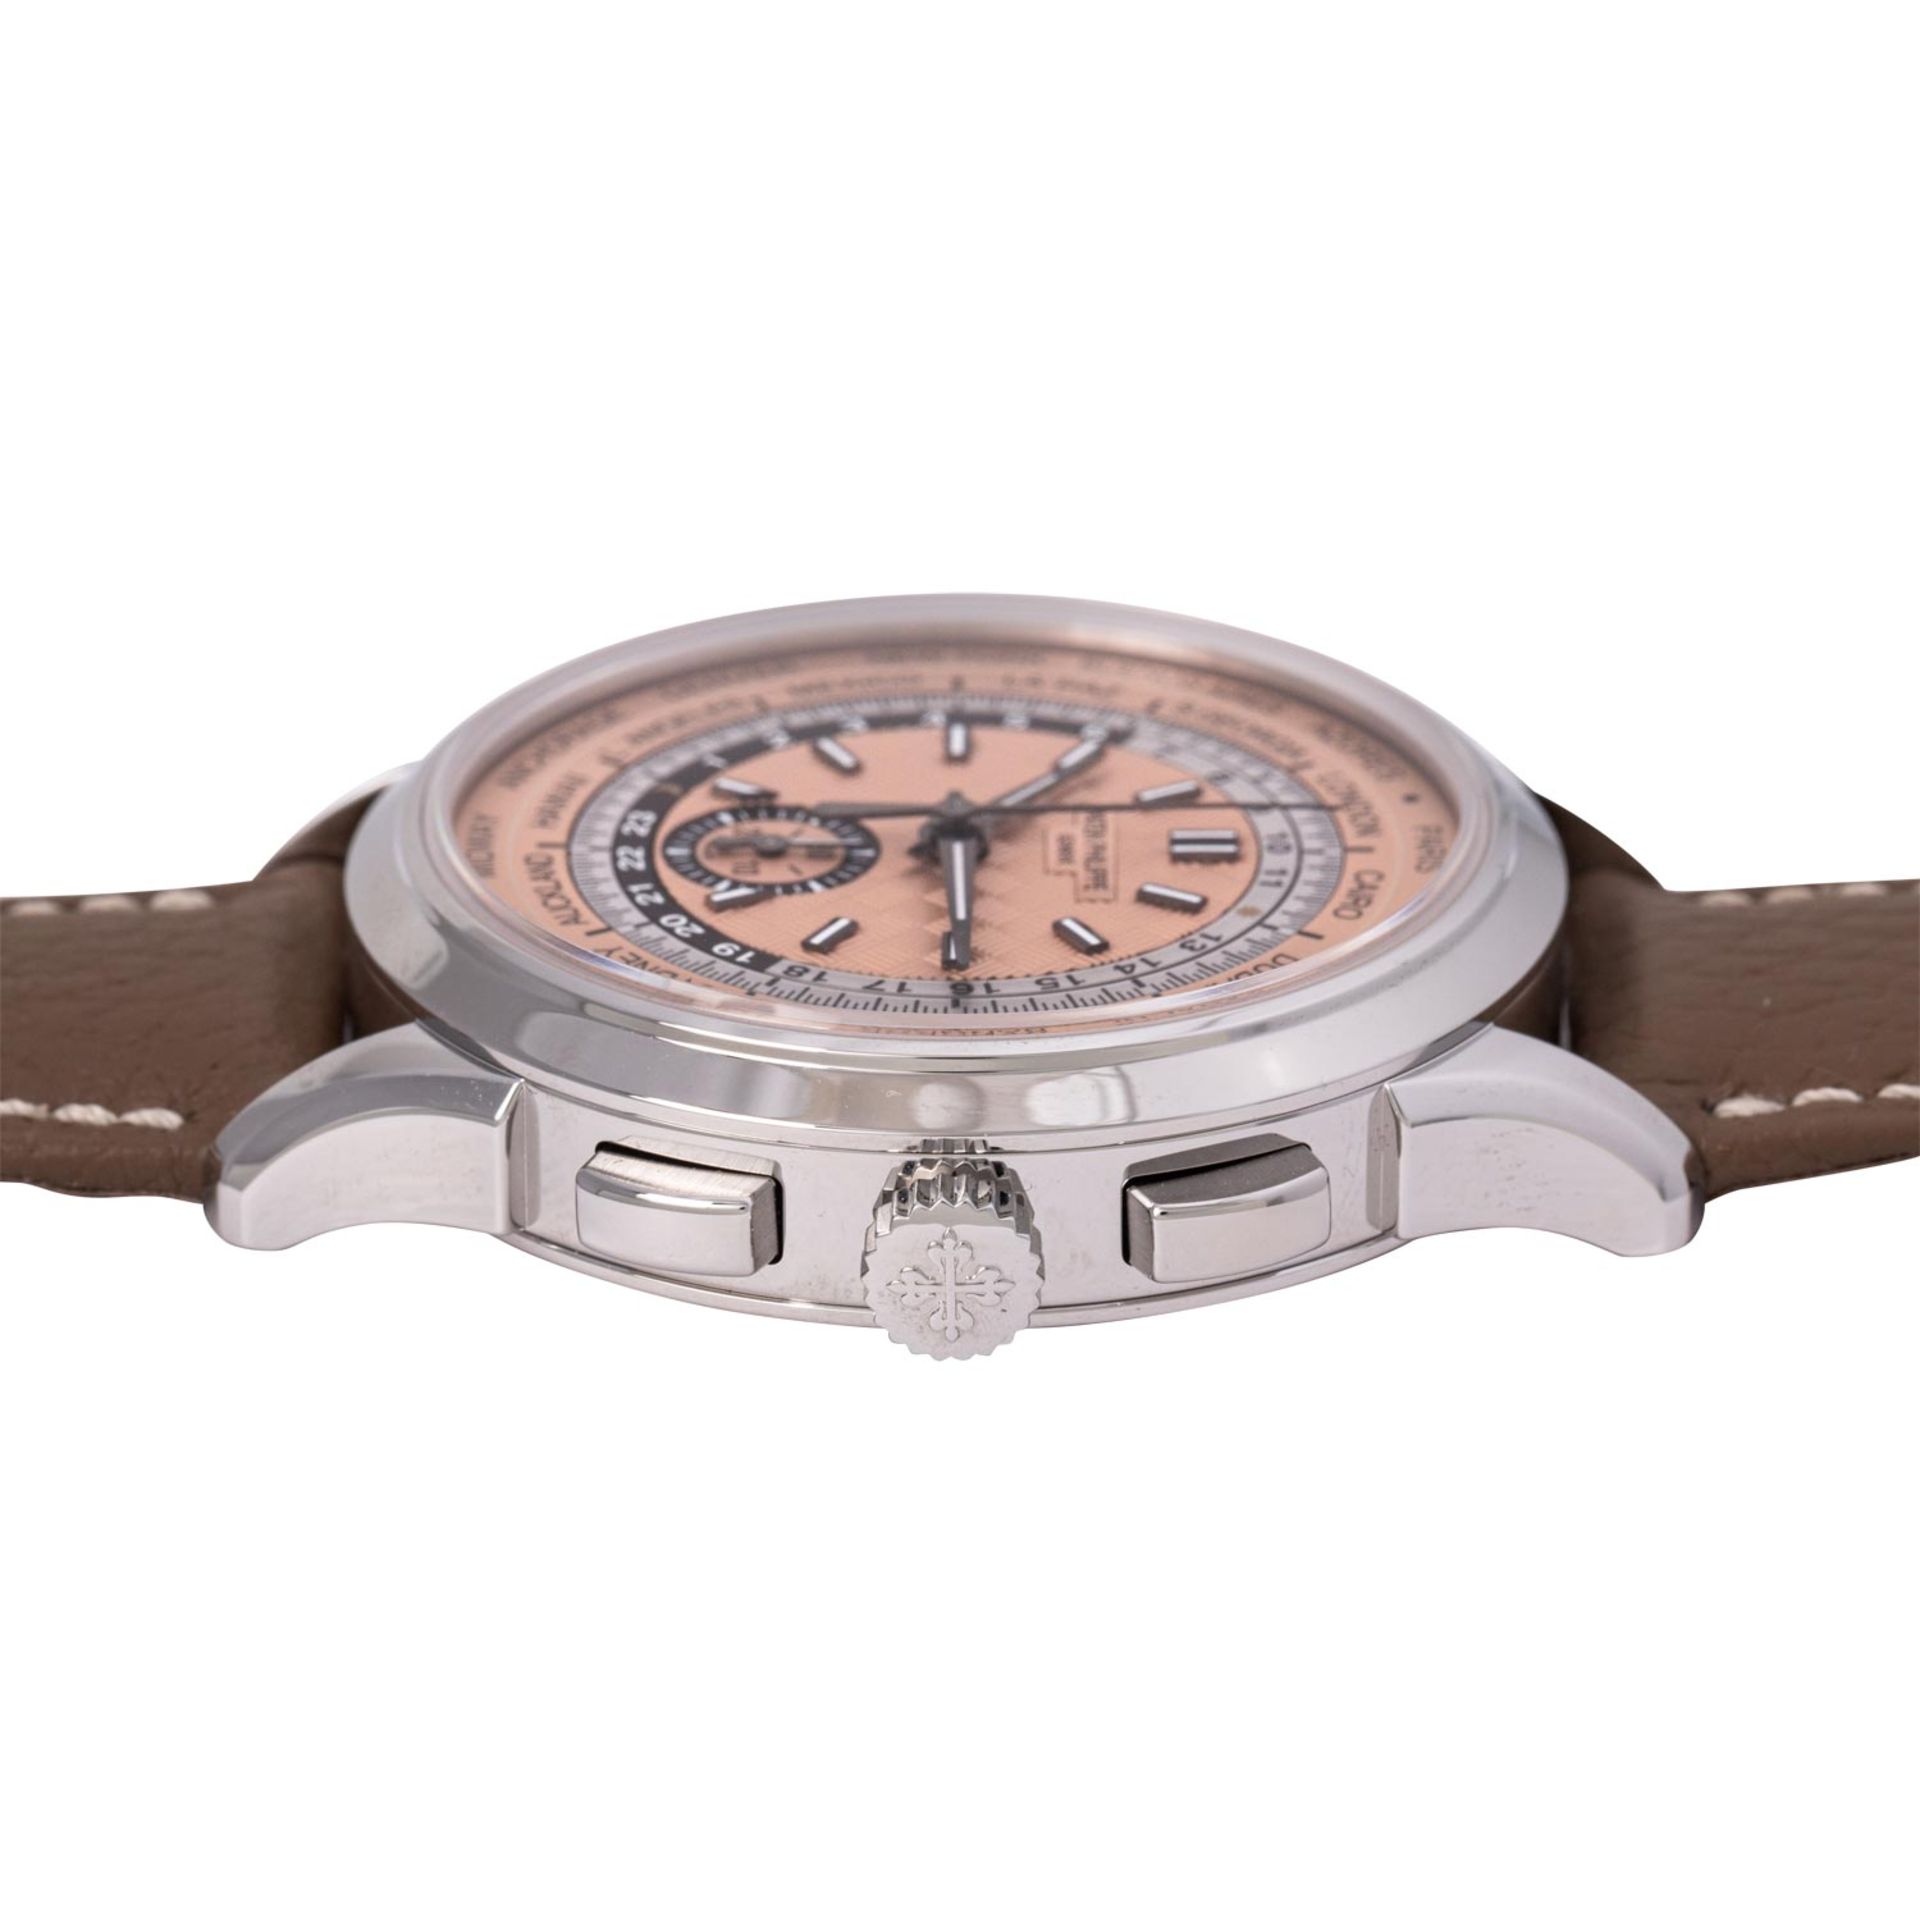 PATEK PHILIPPE World Time Flyback-Chronograph, Ref. 5935A-001. Herrenuhr. - Image 3 of 8